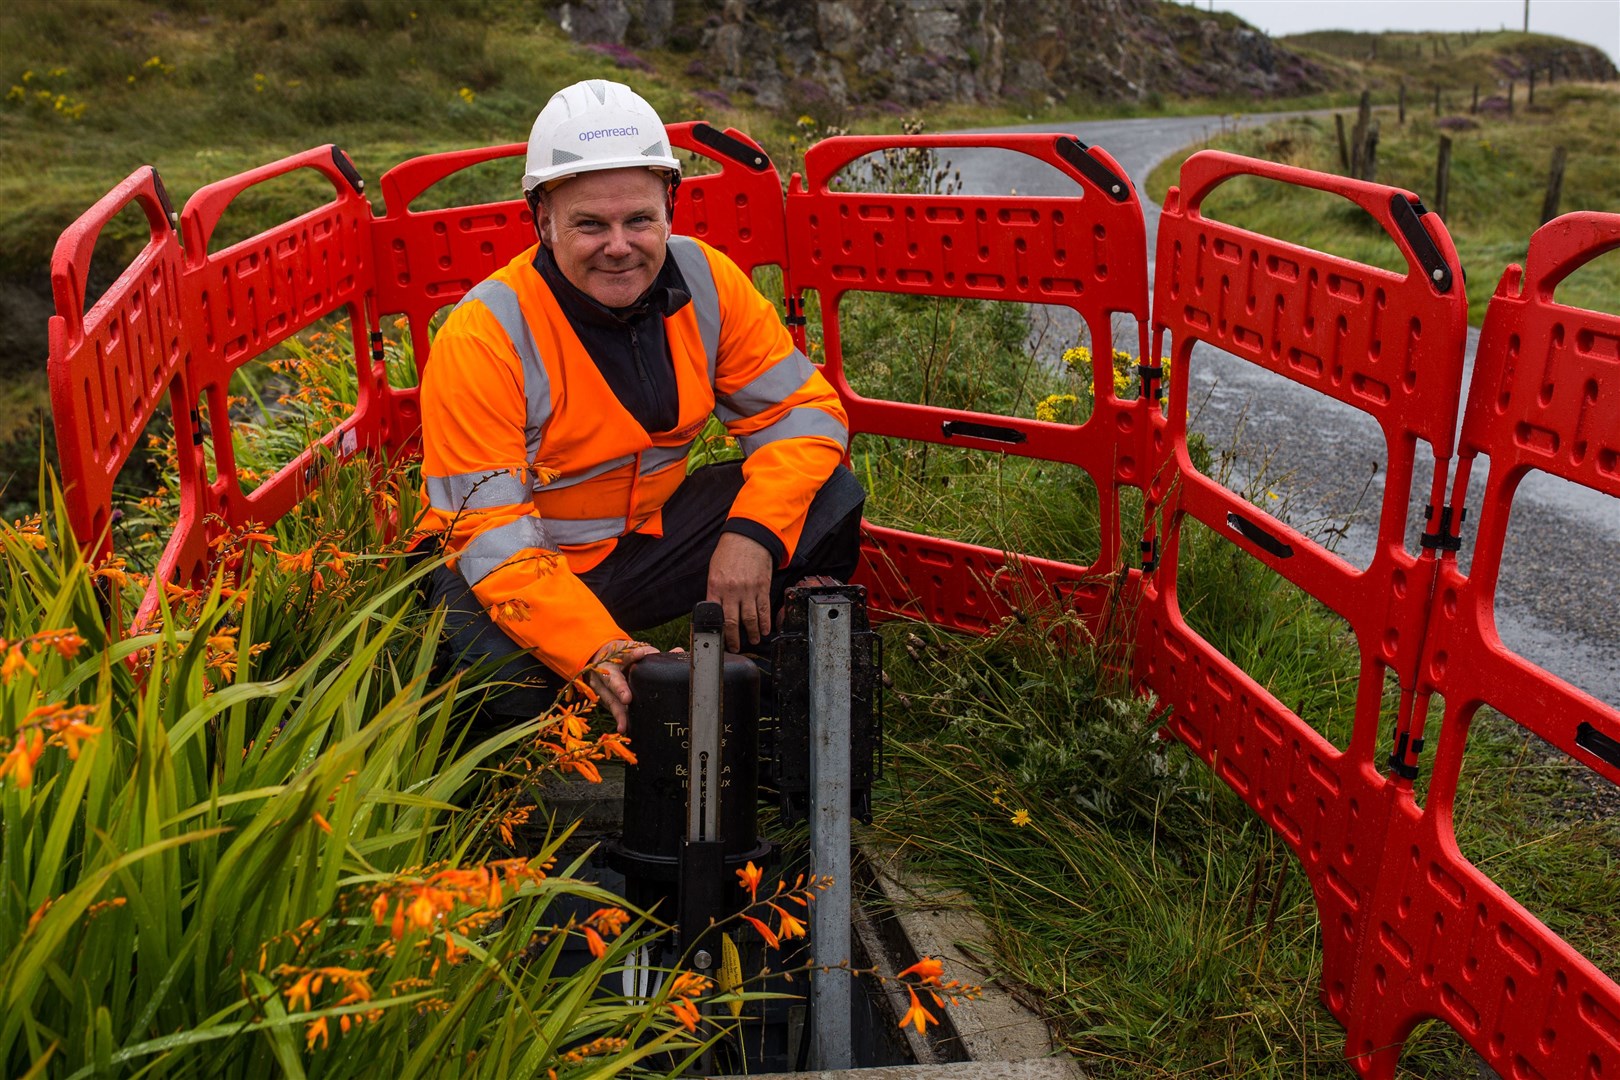 An Openreach engineer at work. Picture: Jennifer Campbell.